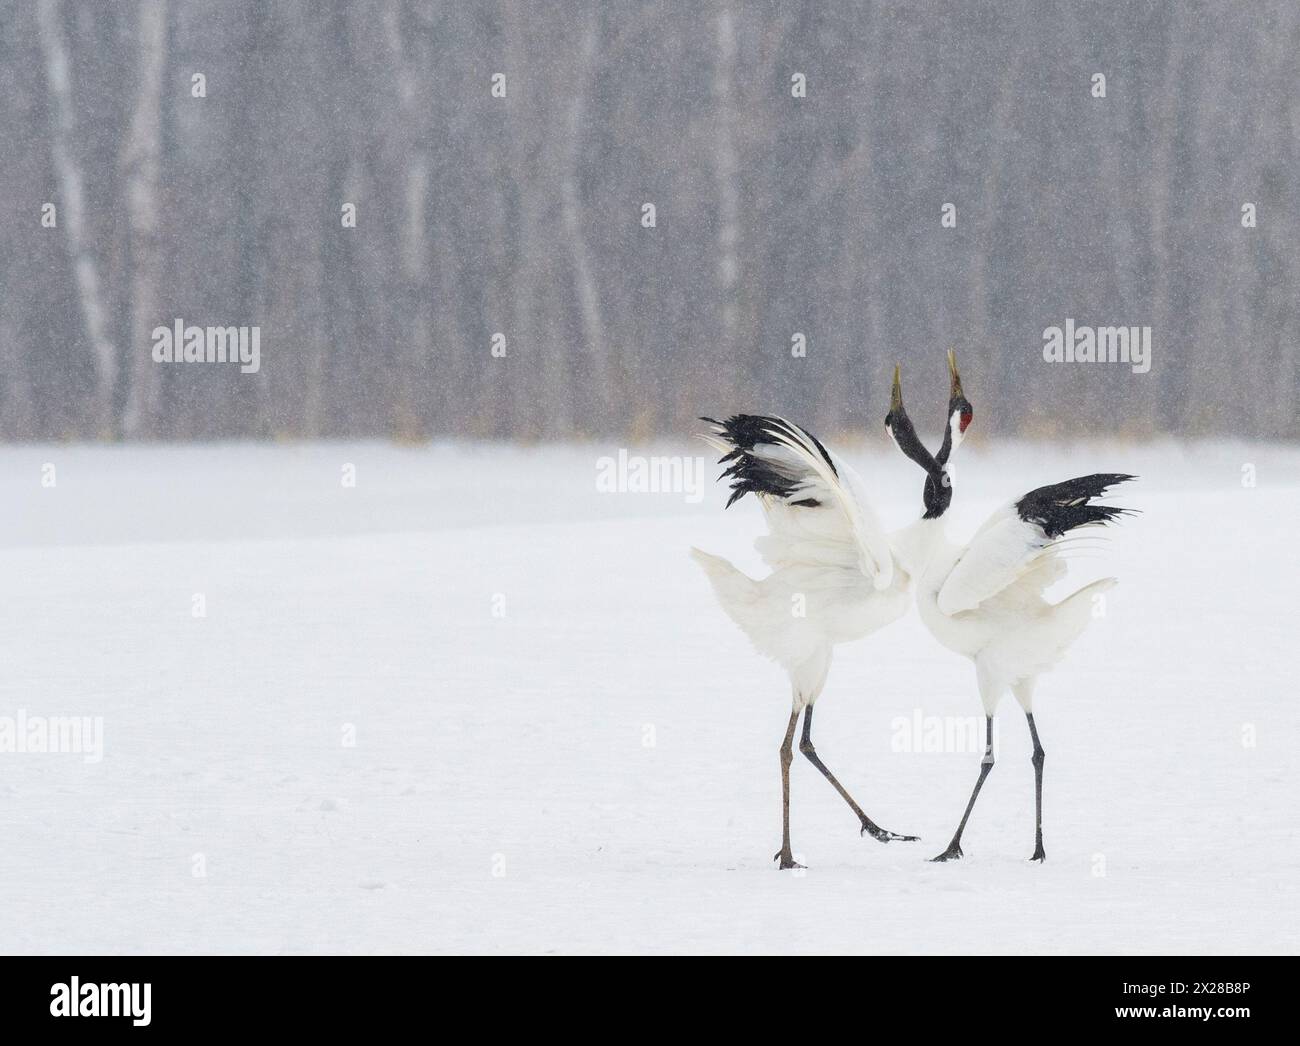 Two Japanese Red-crowned cranes dancing with necks entwined in snowy winter scene Stock Photo